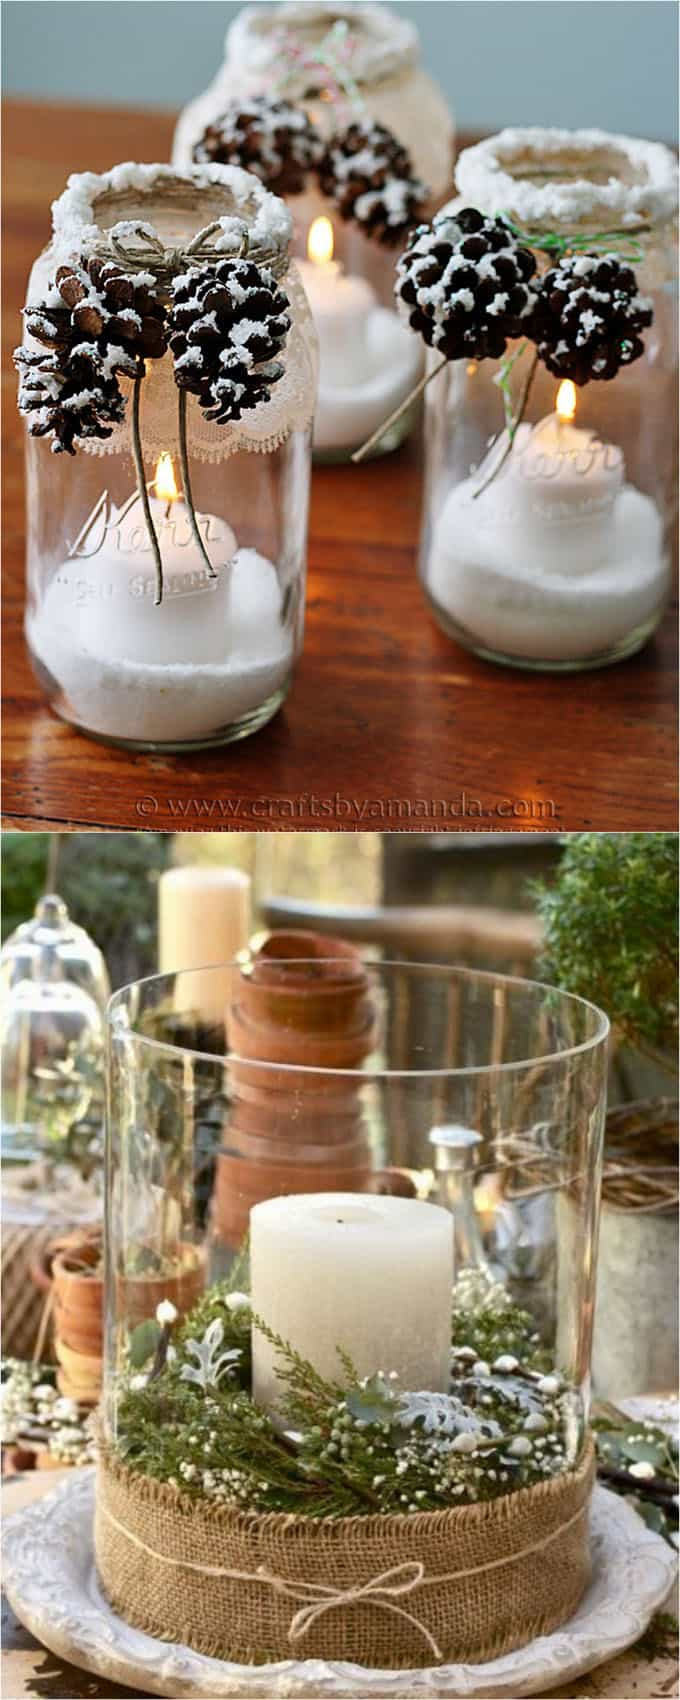 Simple Christmas Table Decorations
 27 Gorgeous DIY Thanksgiving & Christmas Table Decorations